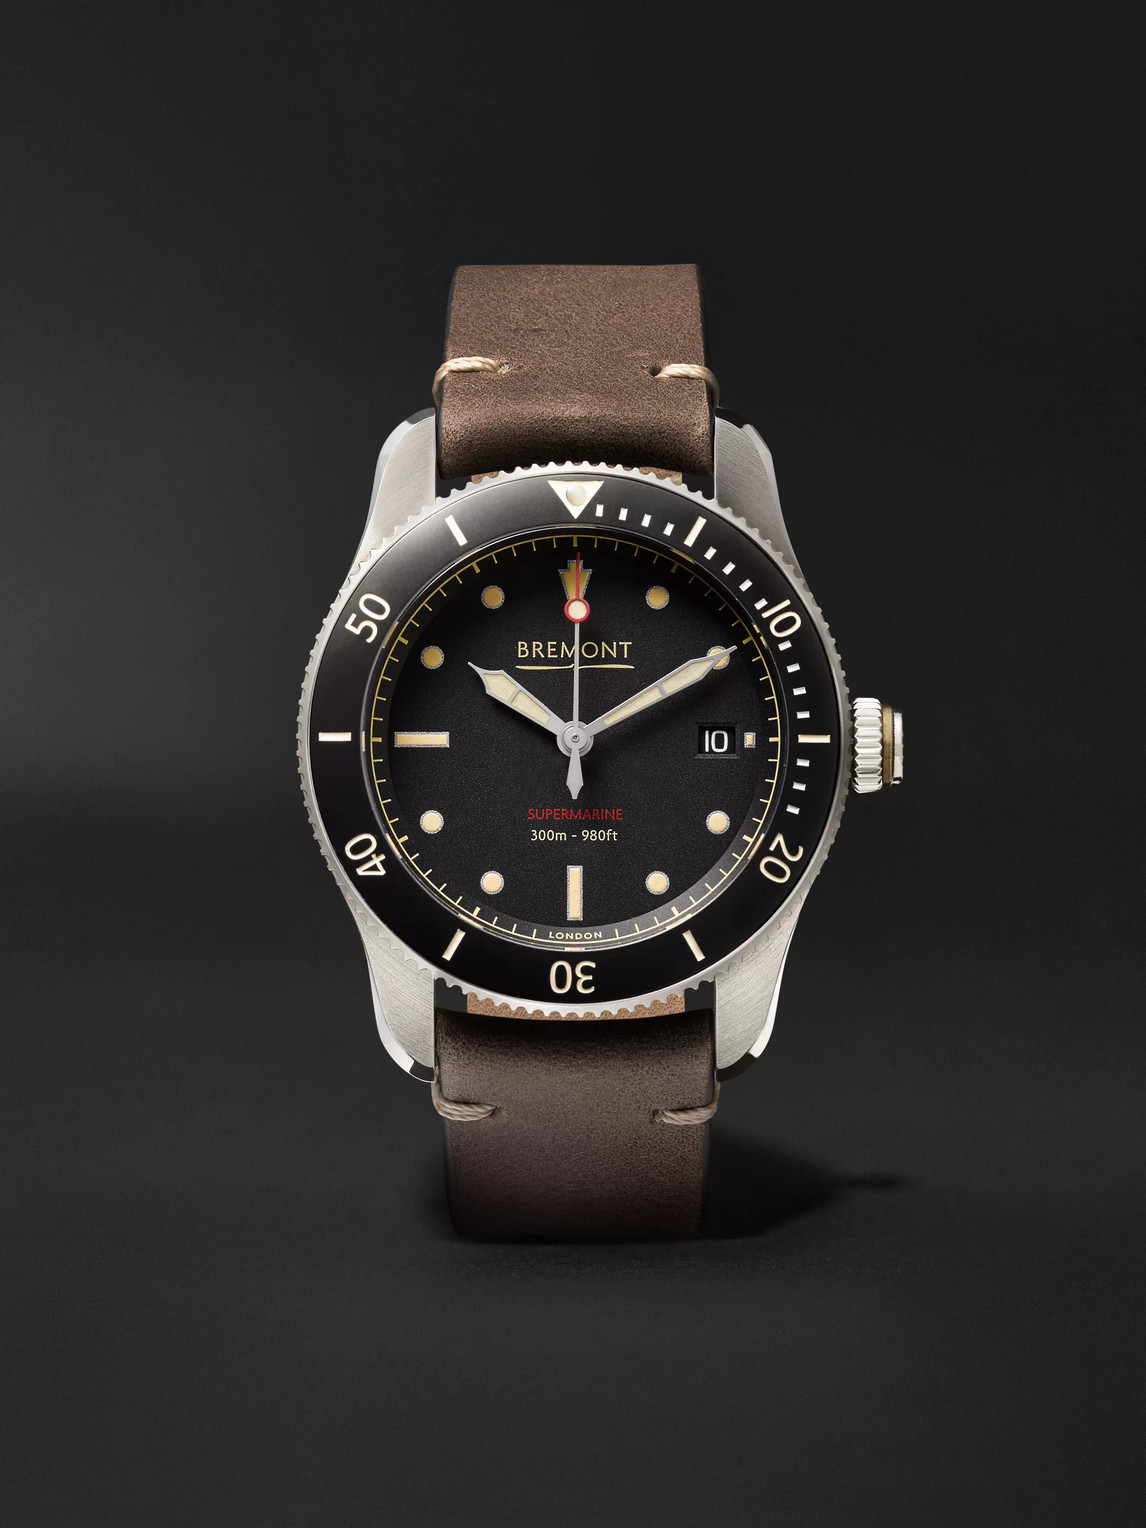 Bremont Supermarine S301 Black Automatic 40mm Stainless Steel And Leather Watch, Ref. S301-bk-r-s